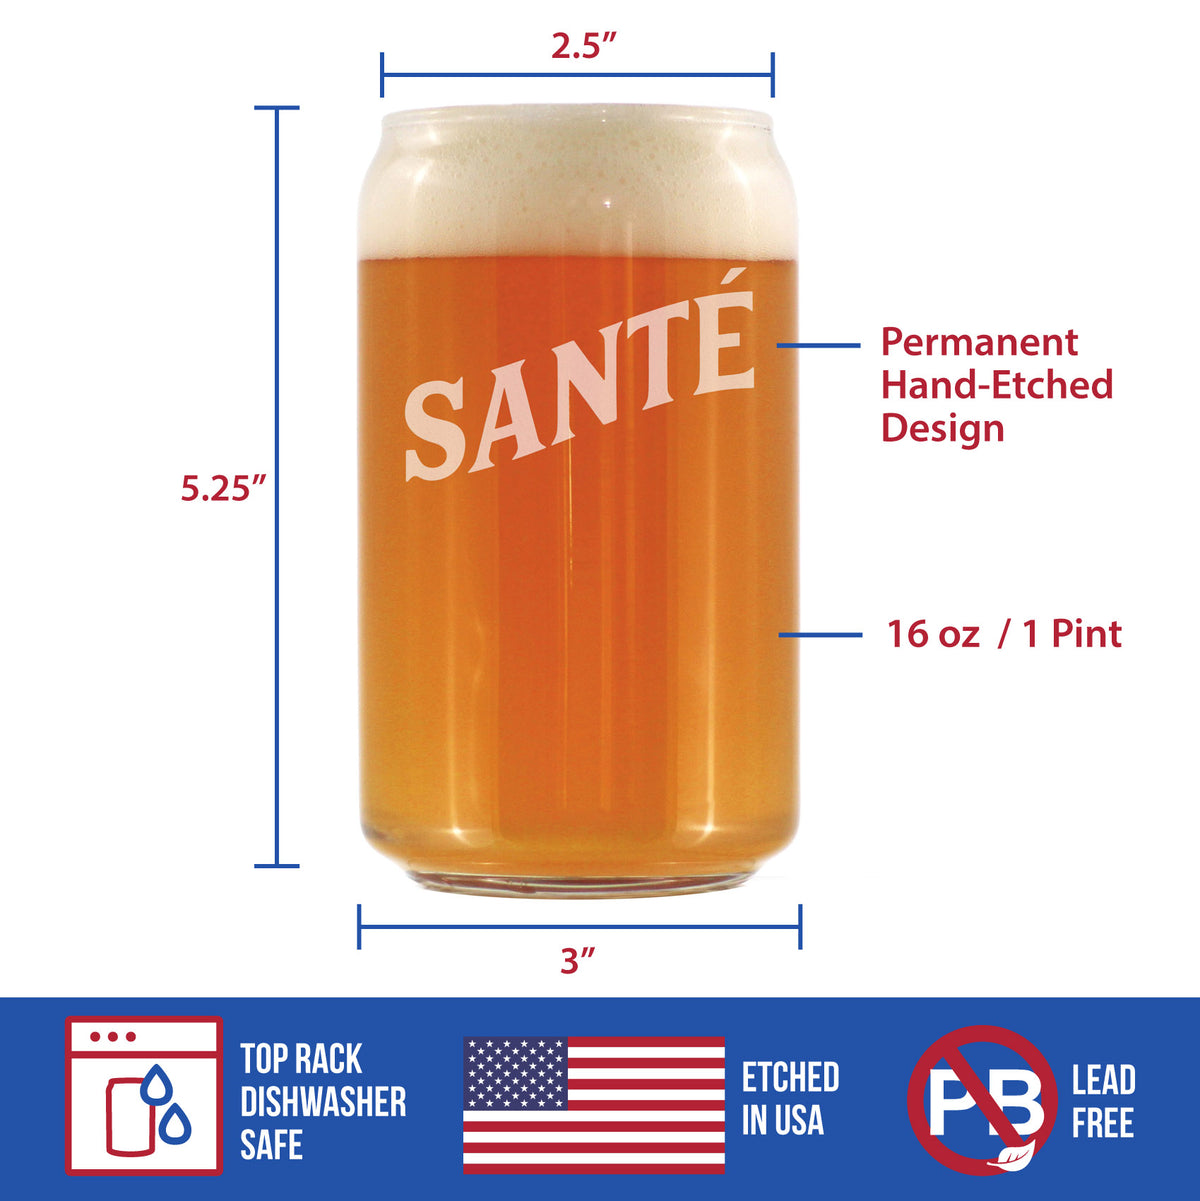 Sante - French Cheers - Fun Beer Can Pint Glasses - Cute France Themed Gifts or Party Decor for Men and Women - 16 oz